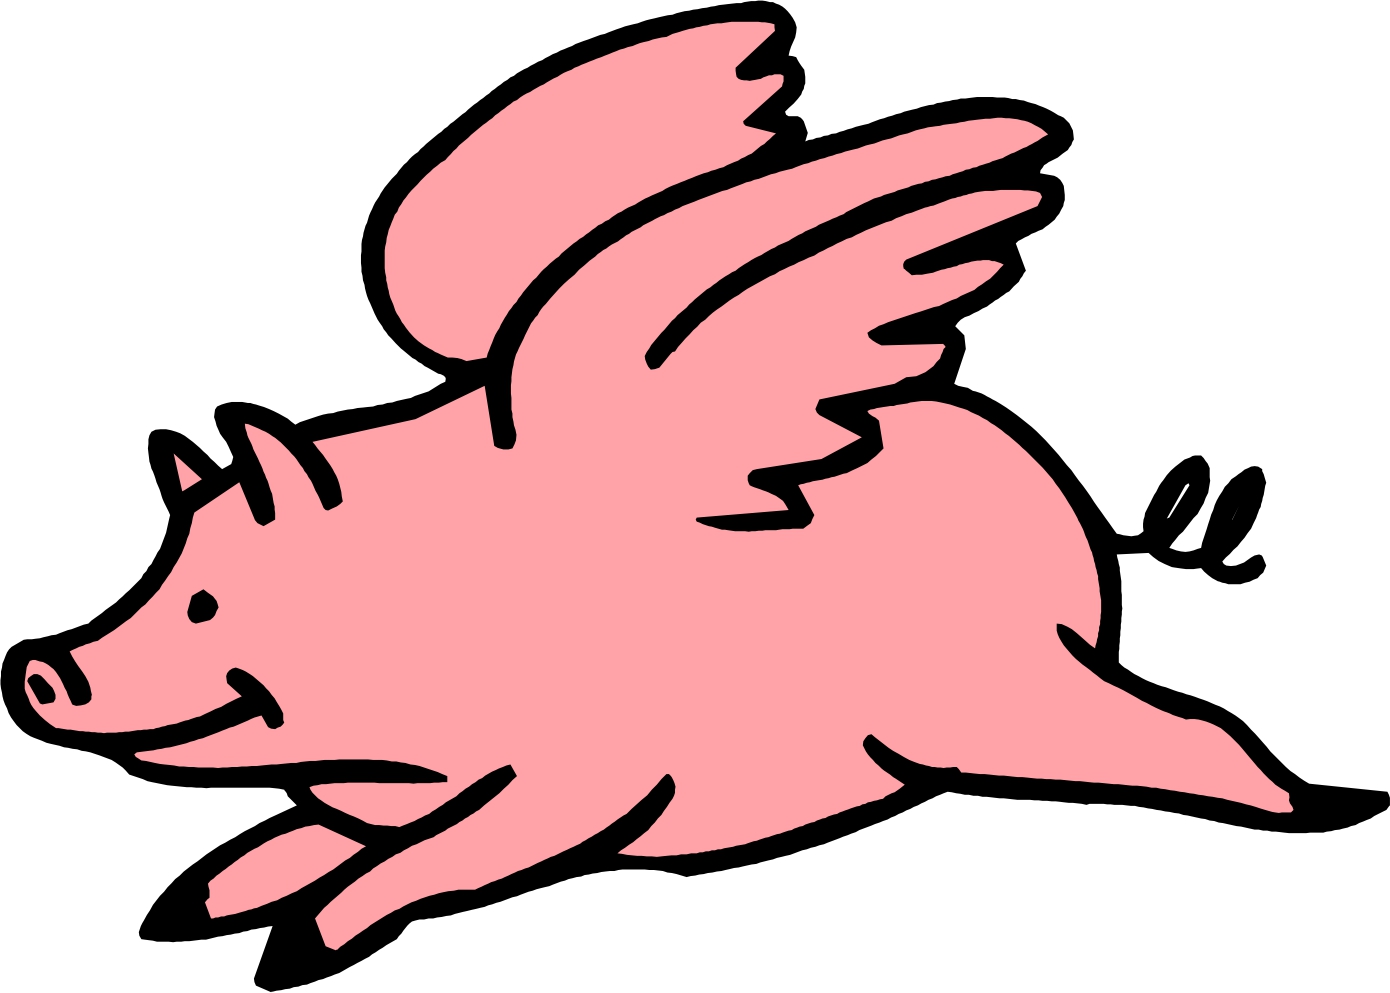 when pigs fly clipart - photo #3